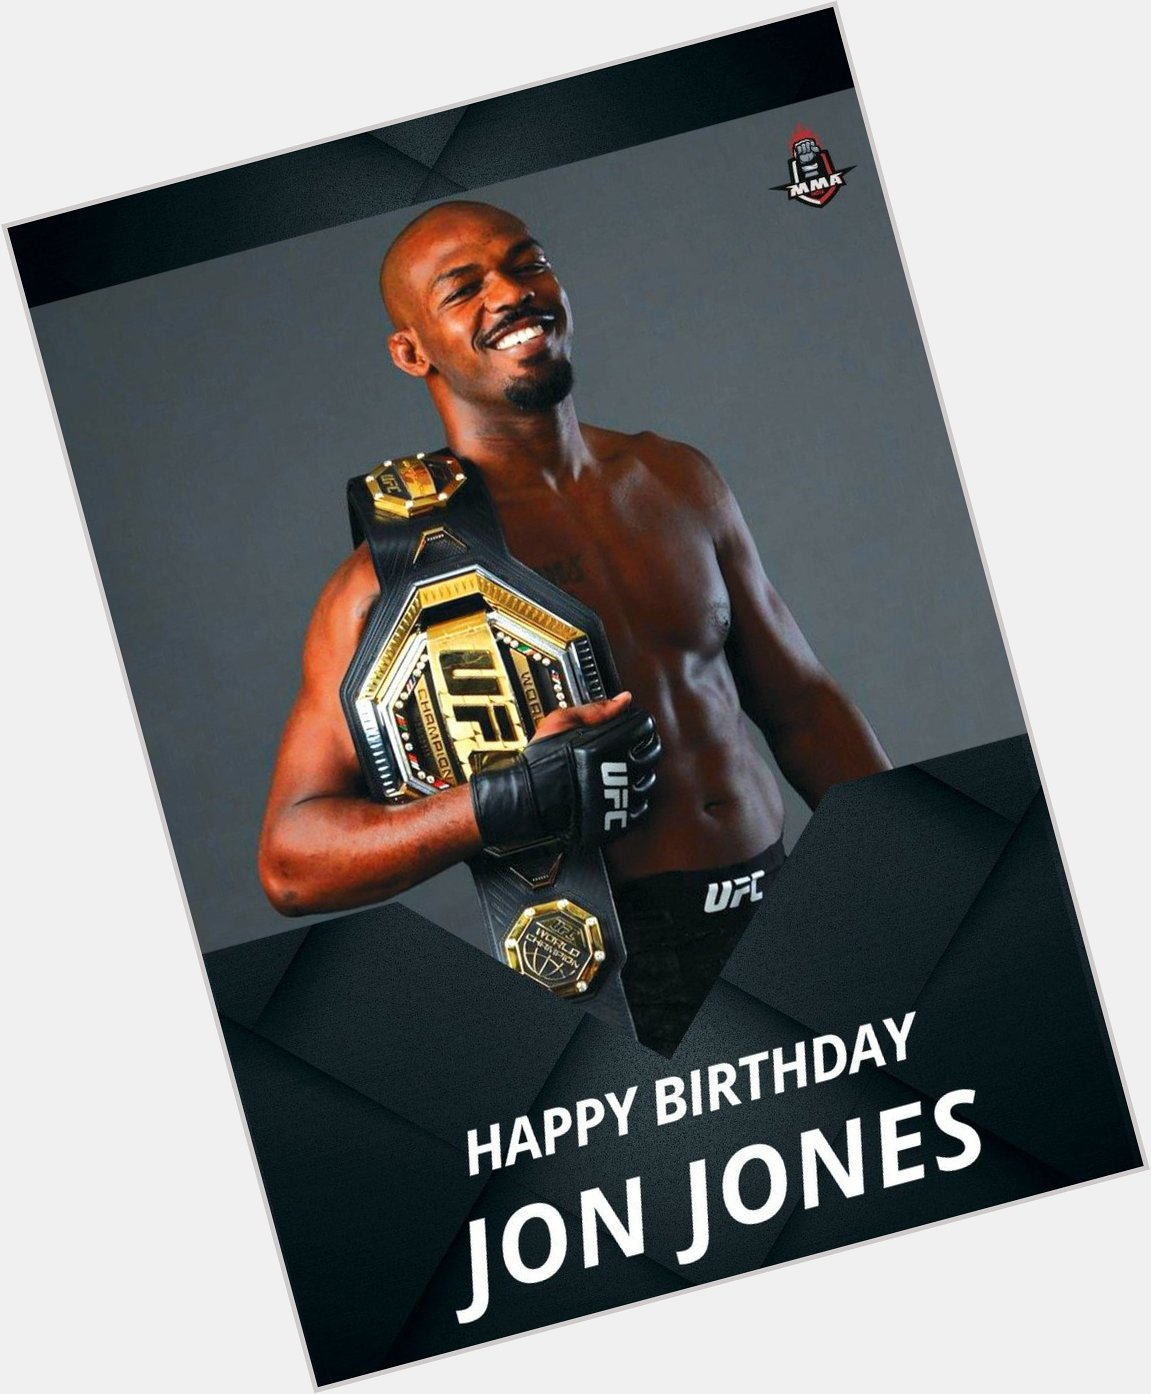 Wishing the Champ Jon Jones ( a very Happy Birthday!  One of the greatest of all time!   